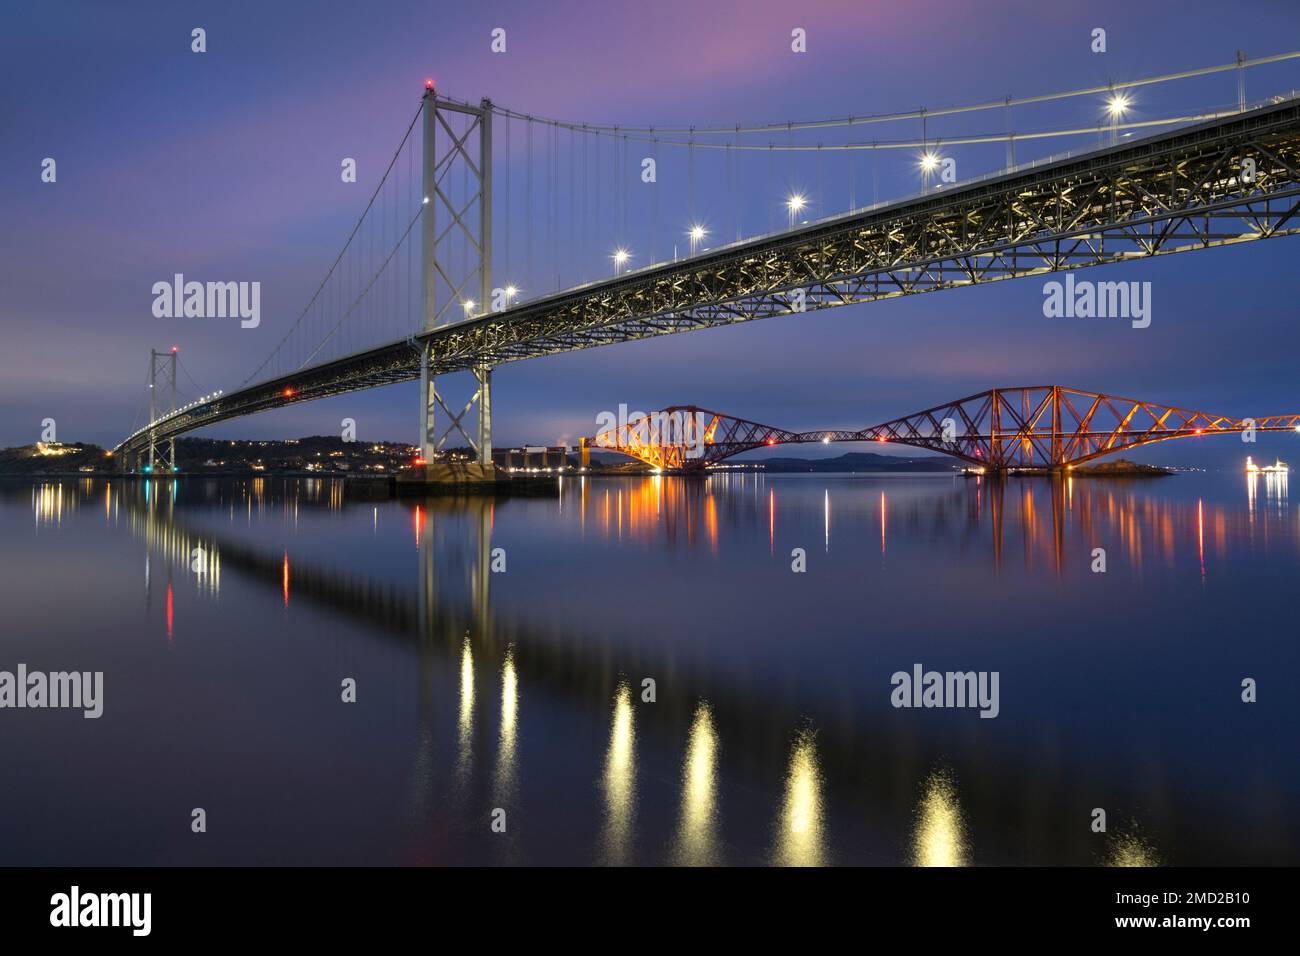 The Forth Road Bridge and Forth Railway Bridge at night spanning the Firth of Forth, Queensferry, near Edinburgh, Scotland, UK Stock Photo